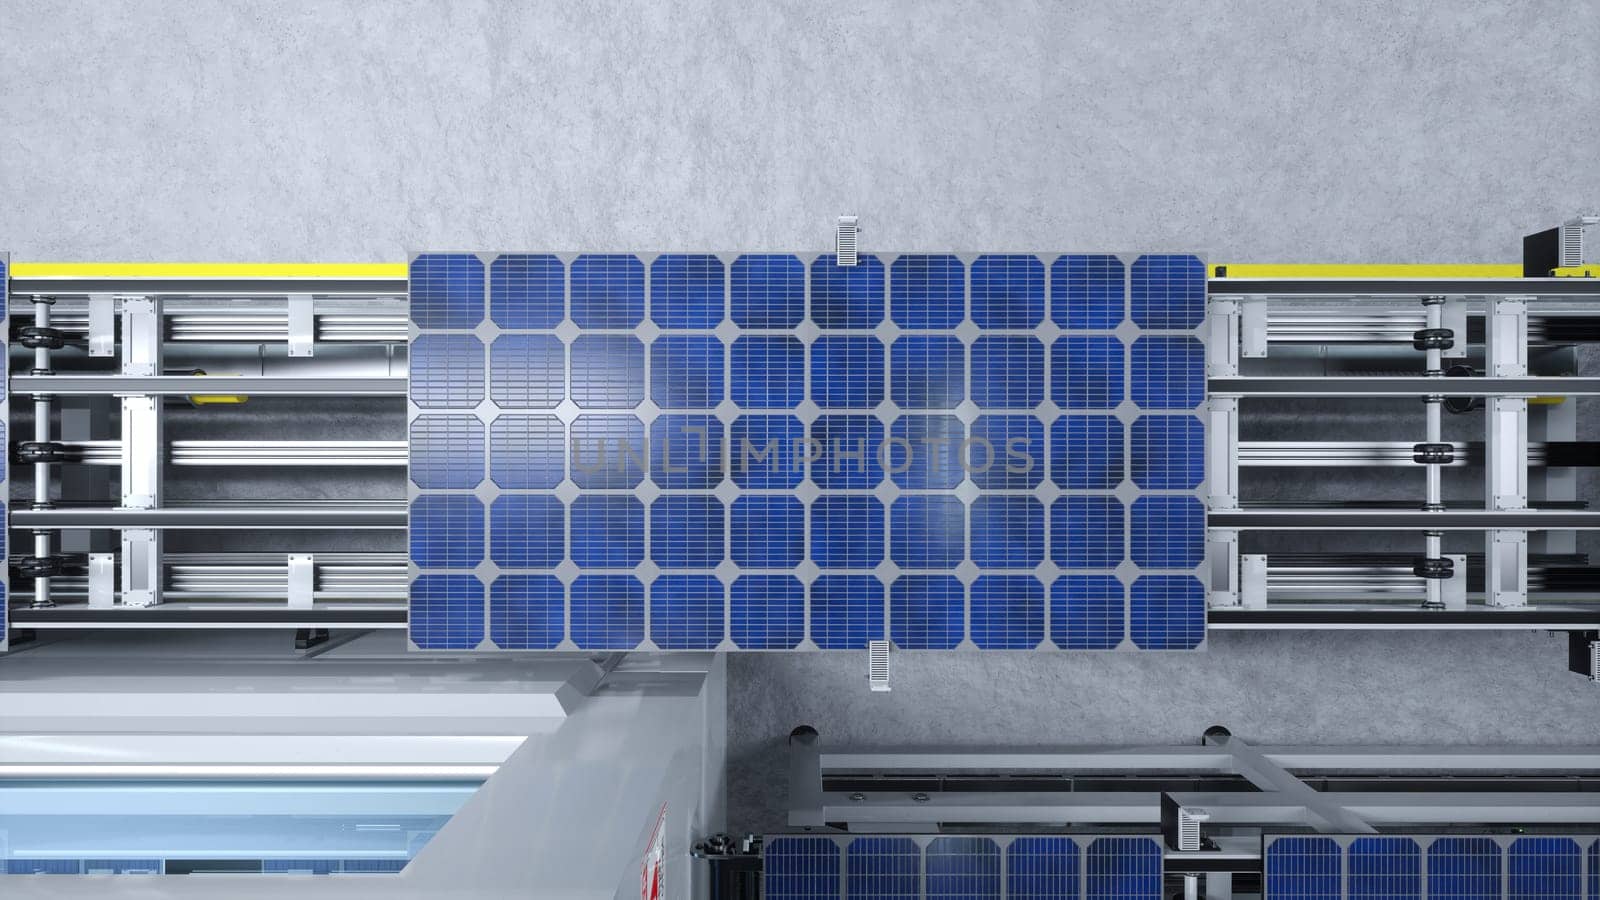 Top down view of solar panels on conveyor belts during high tech production process in clean energy factory, 3D illustration. Aerial shot of photovoltaic cell on assembly line